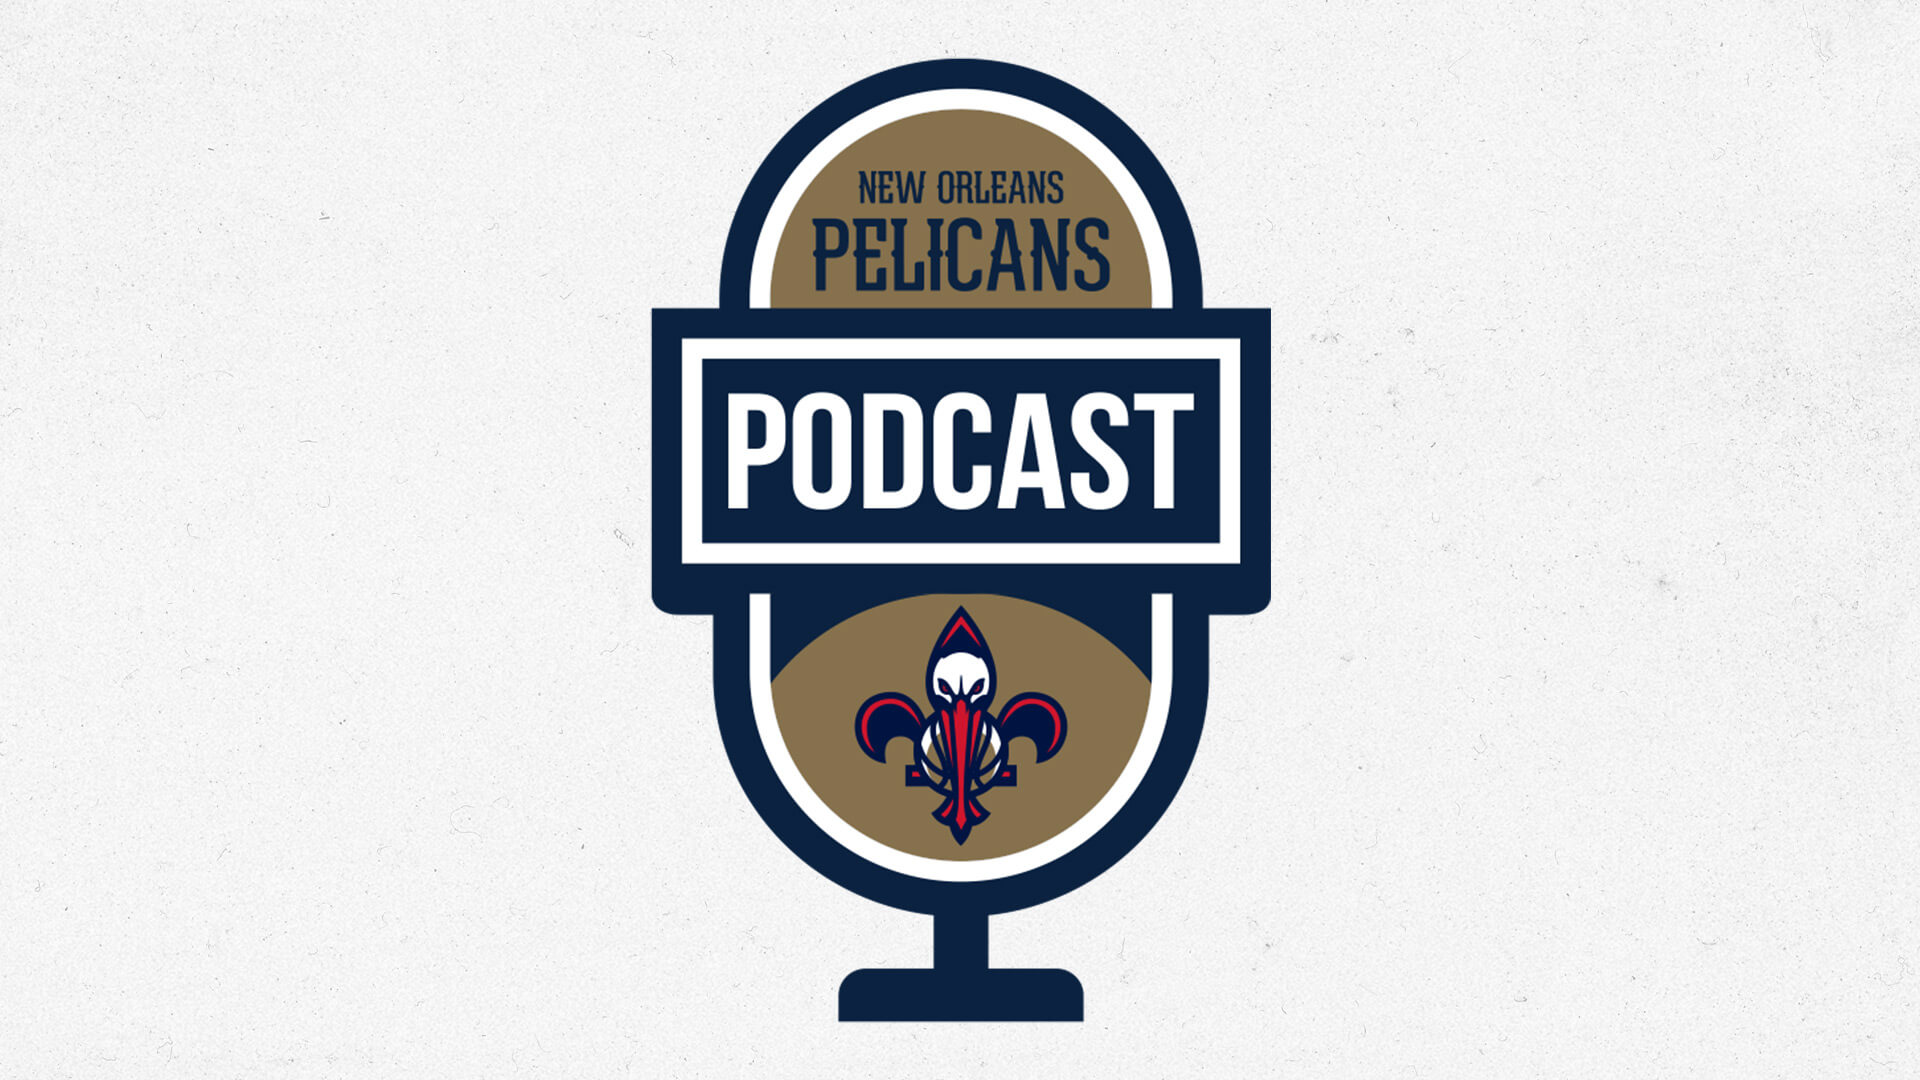 Ryan Anderson on the New Orleans Pelicans podcast presented by SeatGeek - March 16, 2021